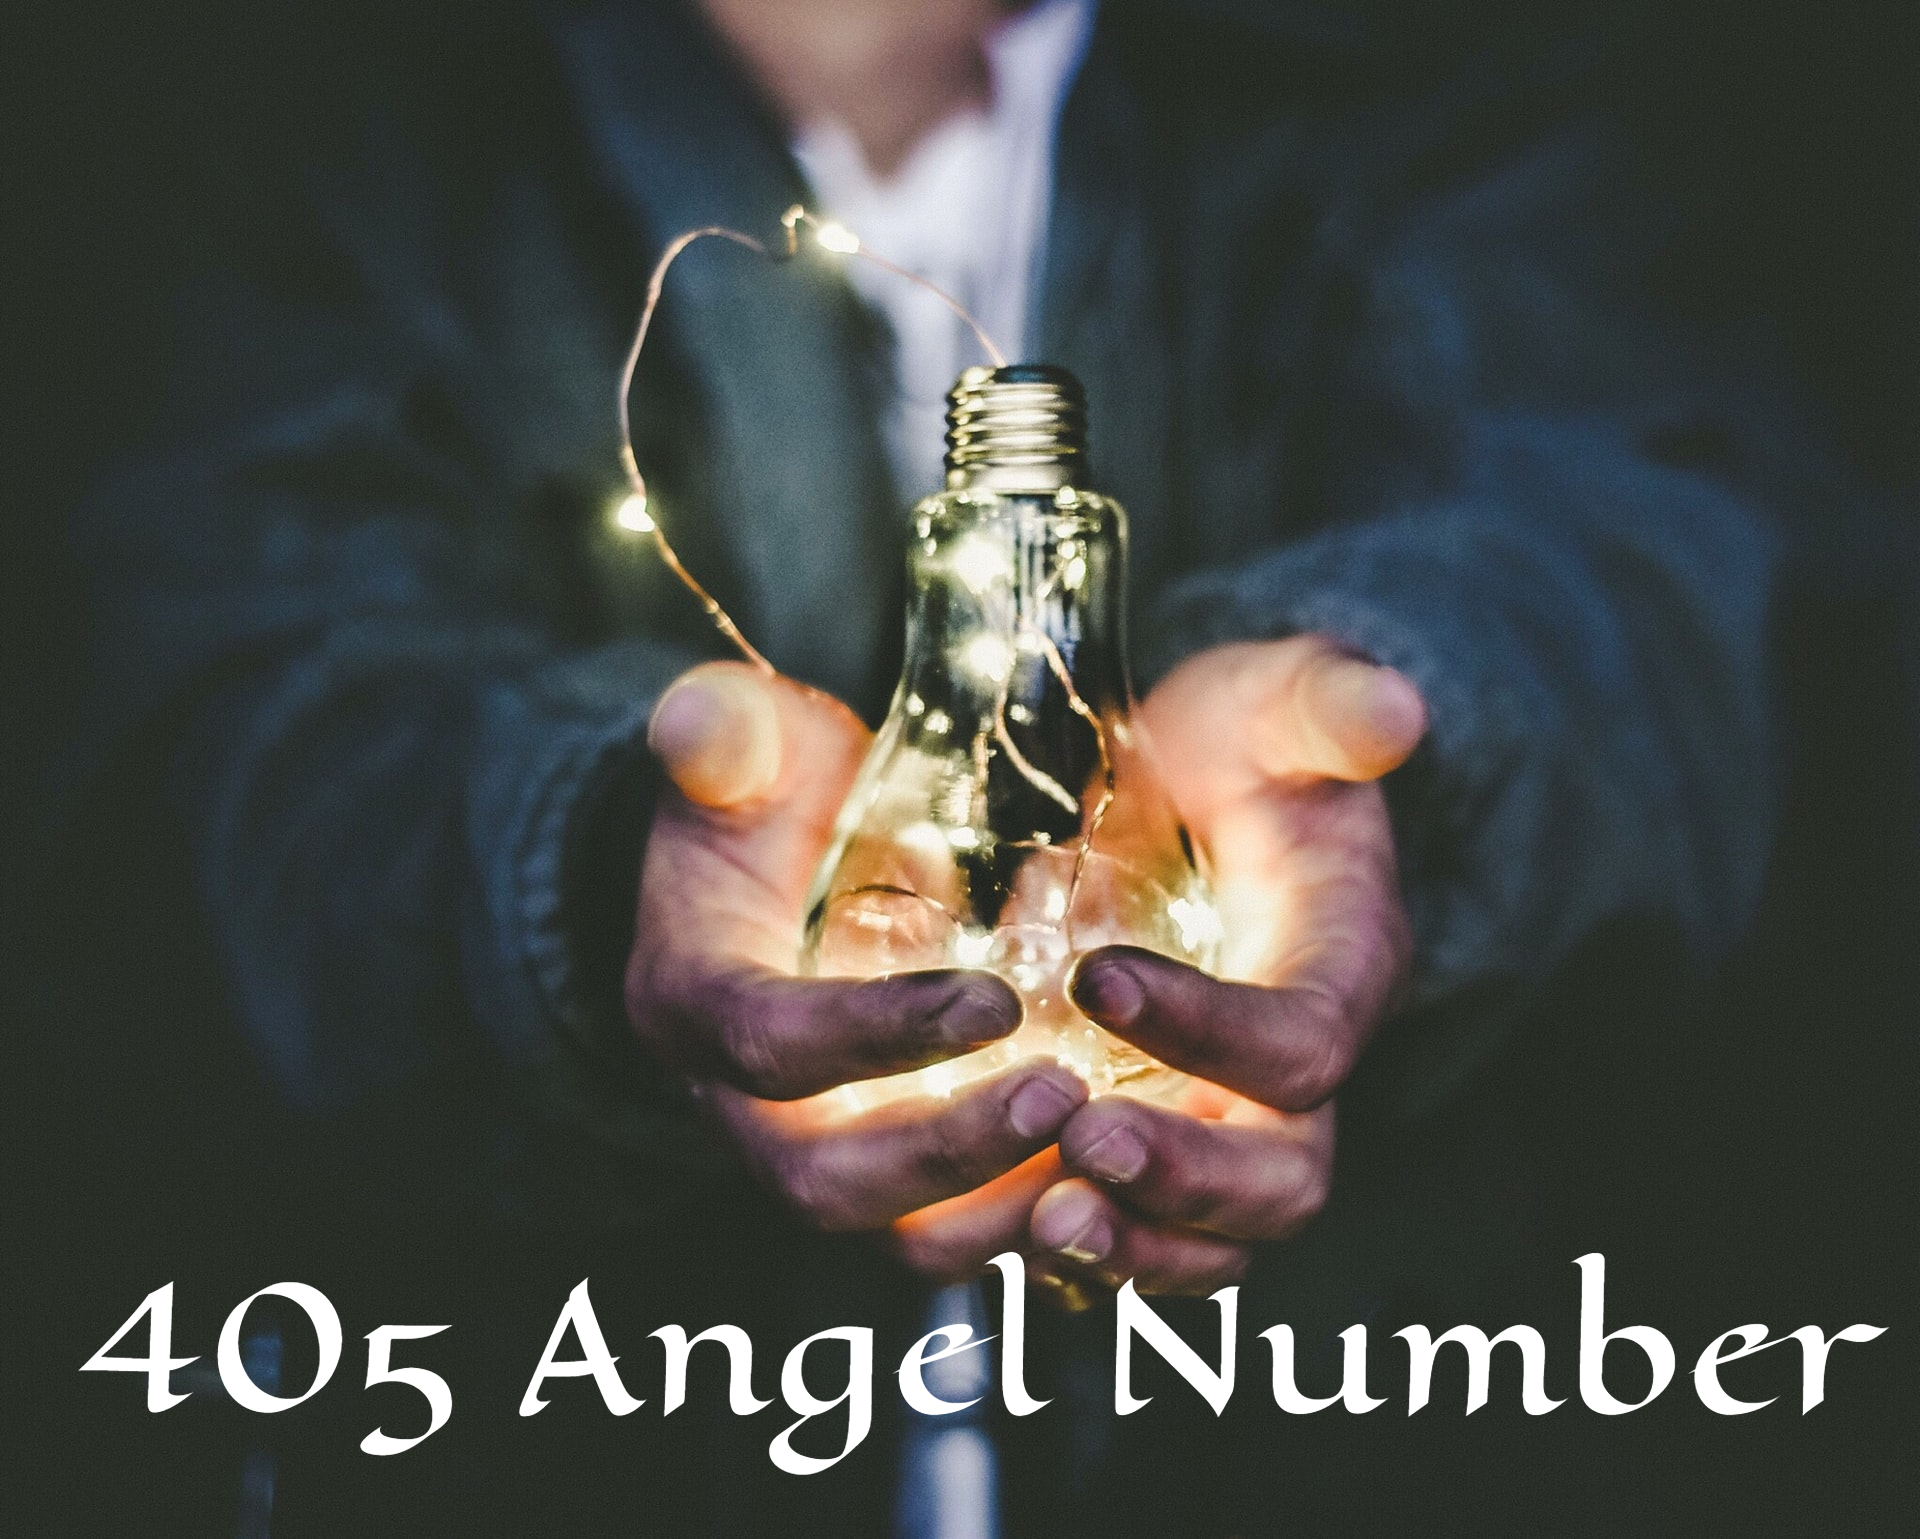 405 Angel Number Stands For Growth Prosperity And Abundance